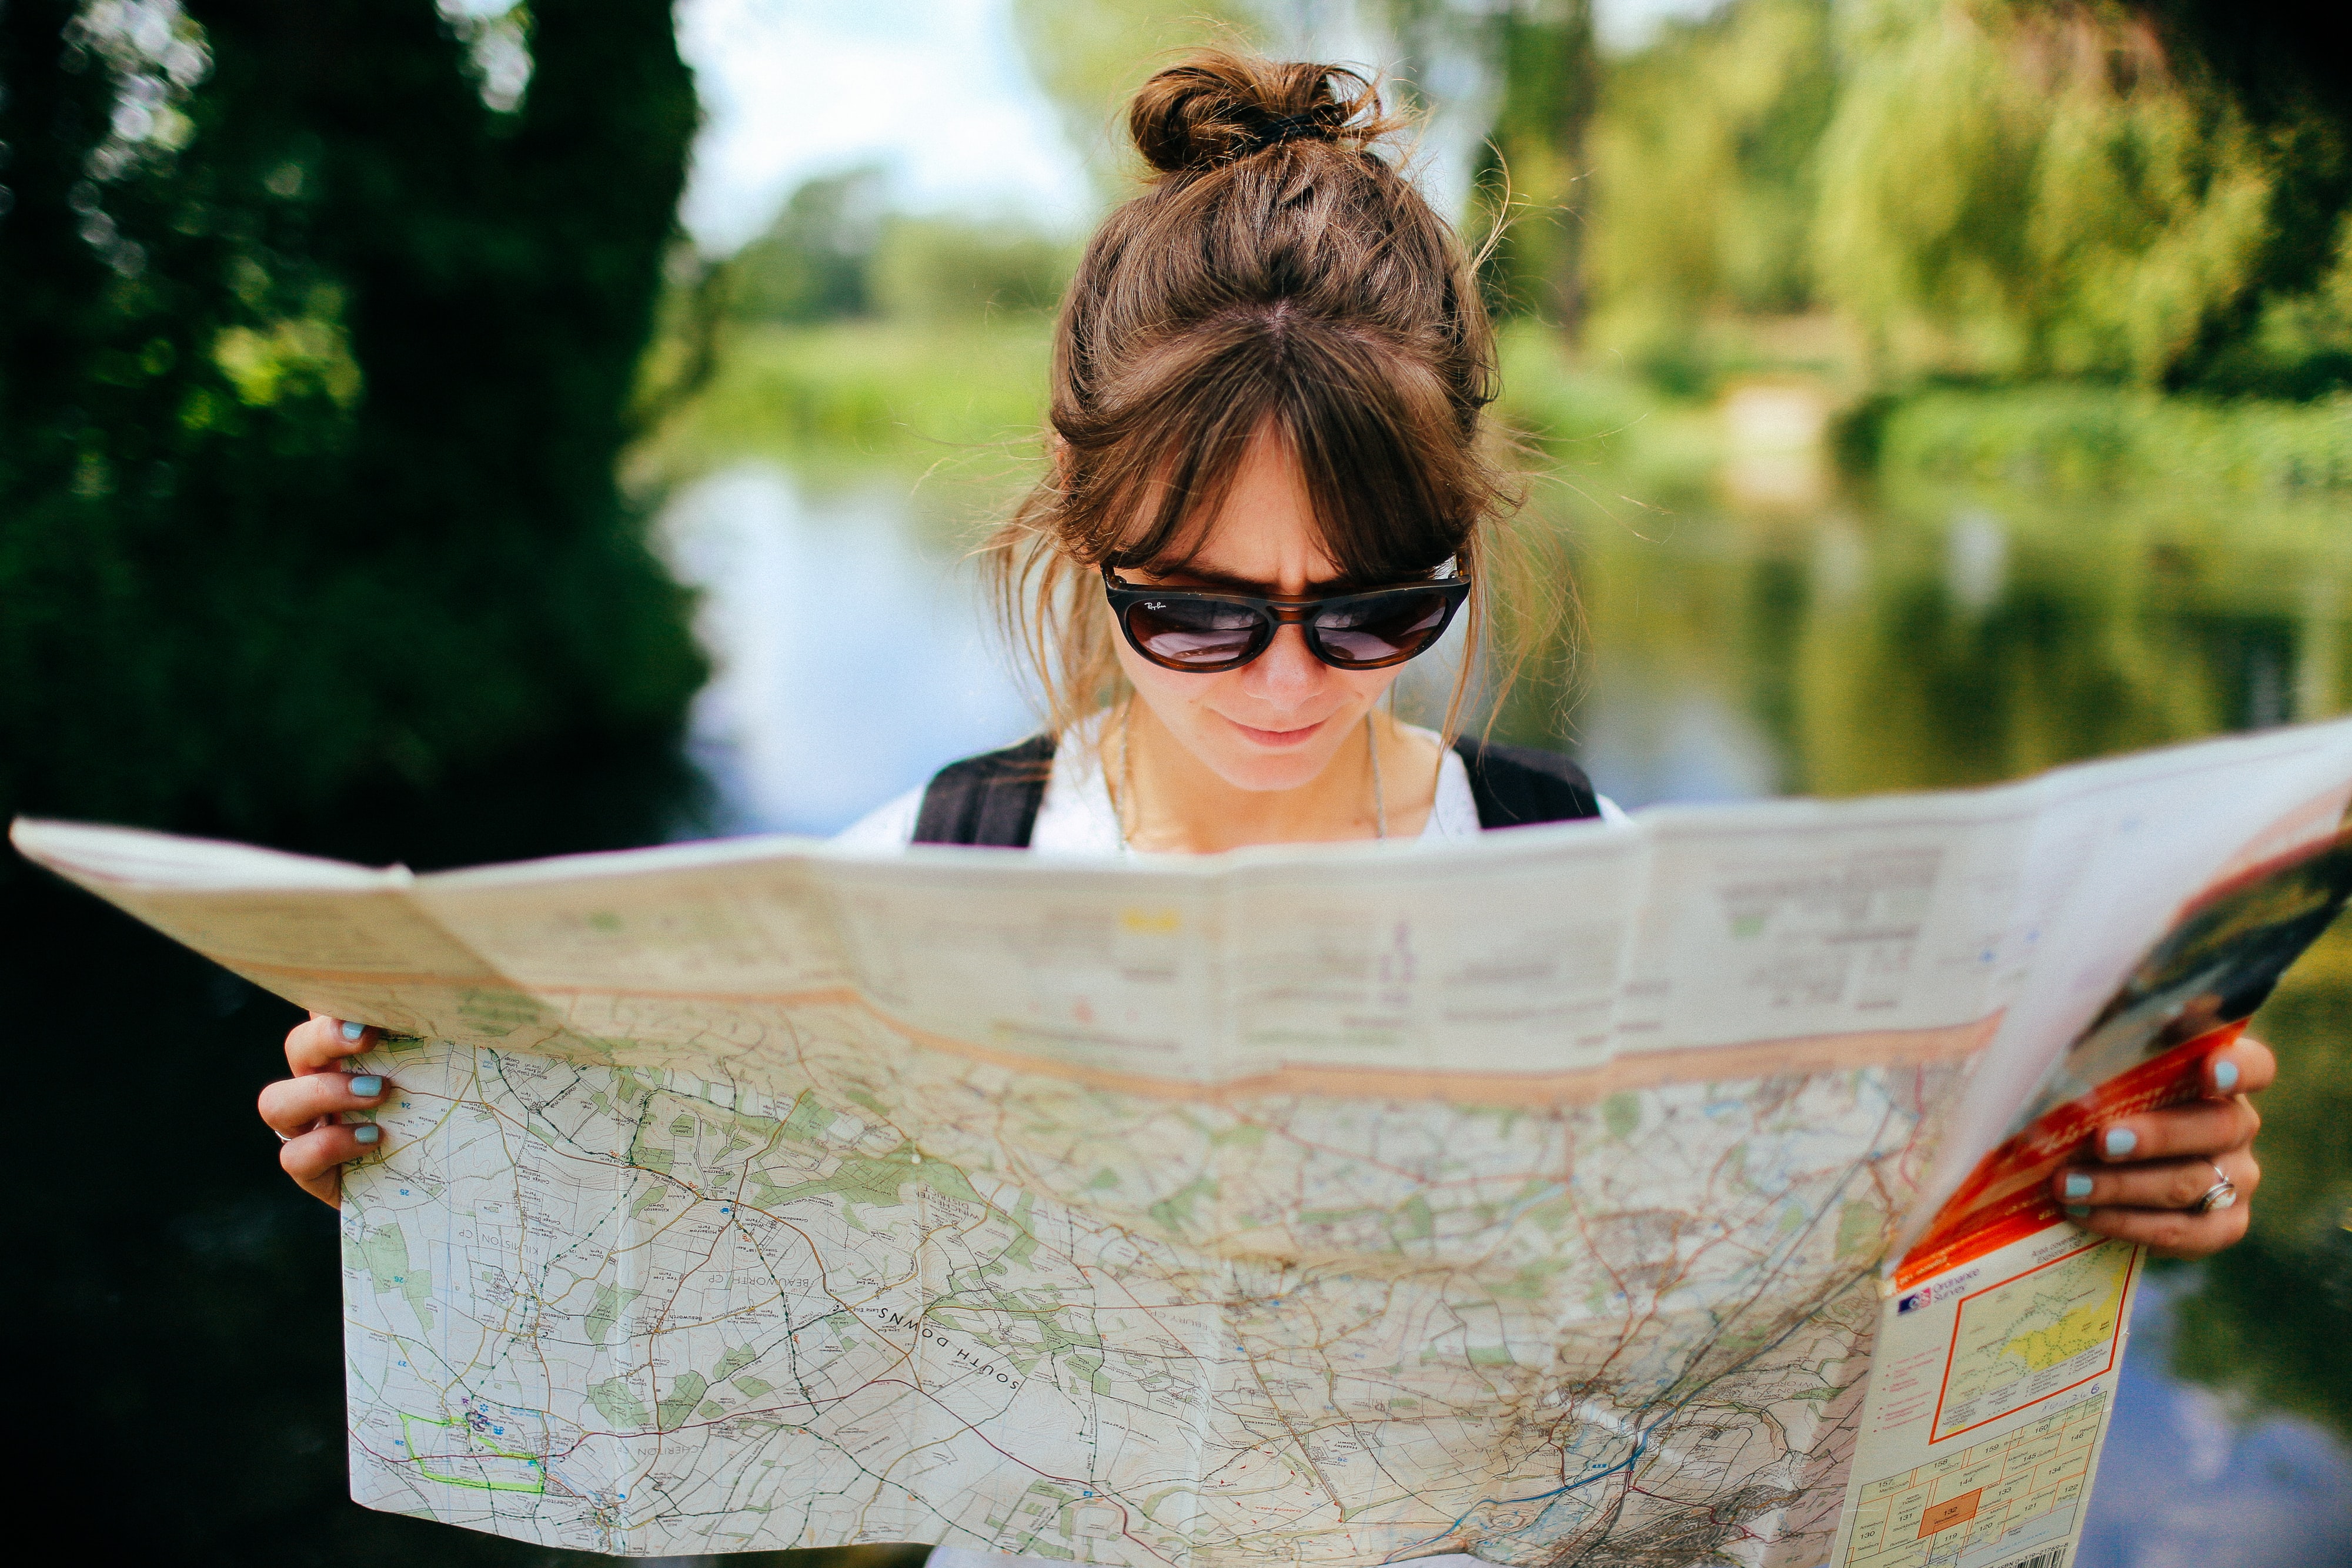 A woman wearing sunglasses standing in front of a lake, mapping out her route on a map.